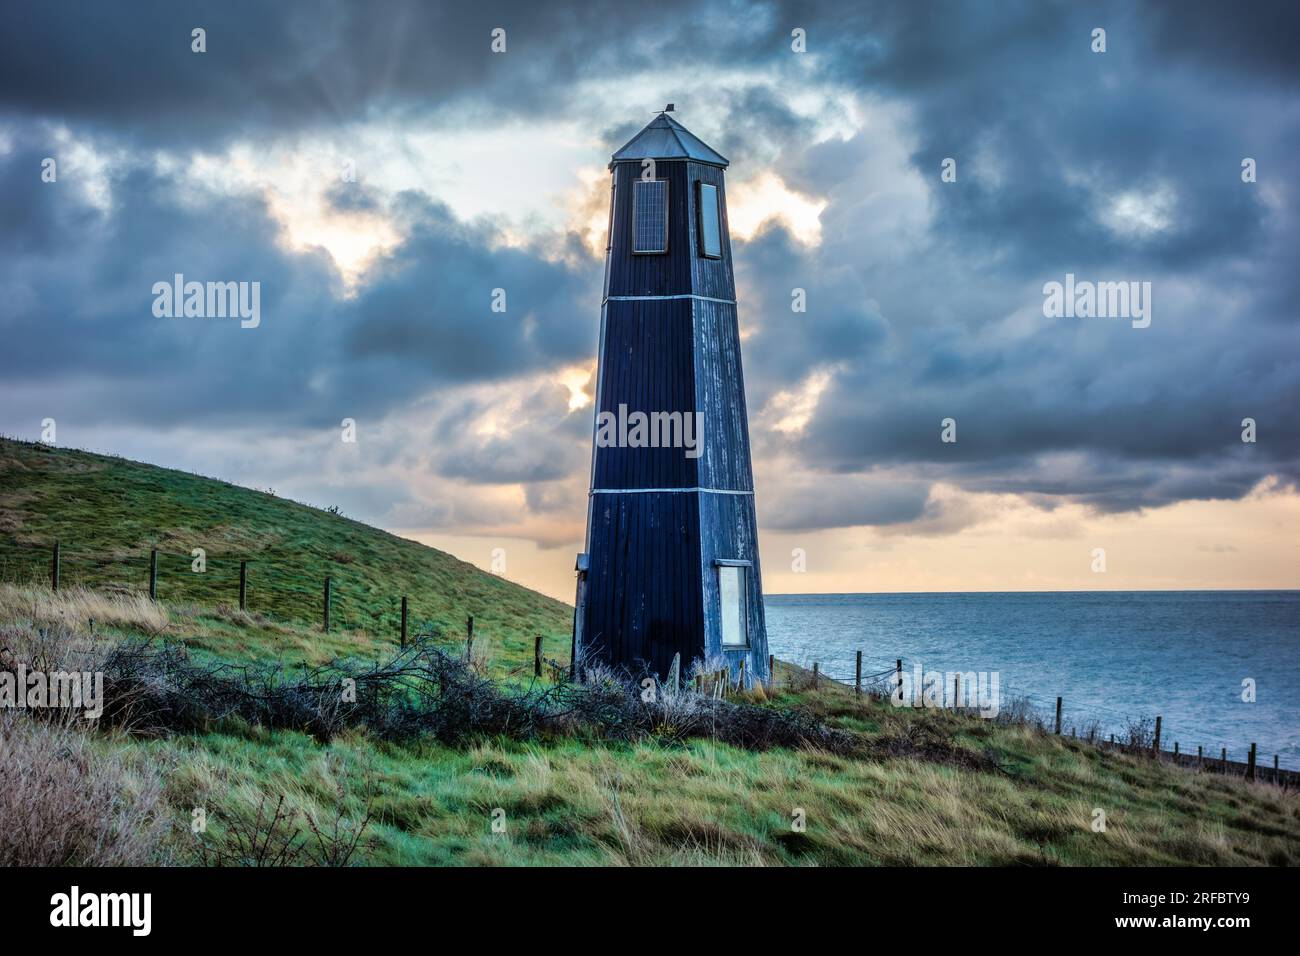 The Samphire Tower by Jony Easterby and Pippa Taylor, Samphire Hoe nature reserve country park, Dover, with a dark moody sky Stock Photo